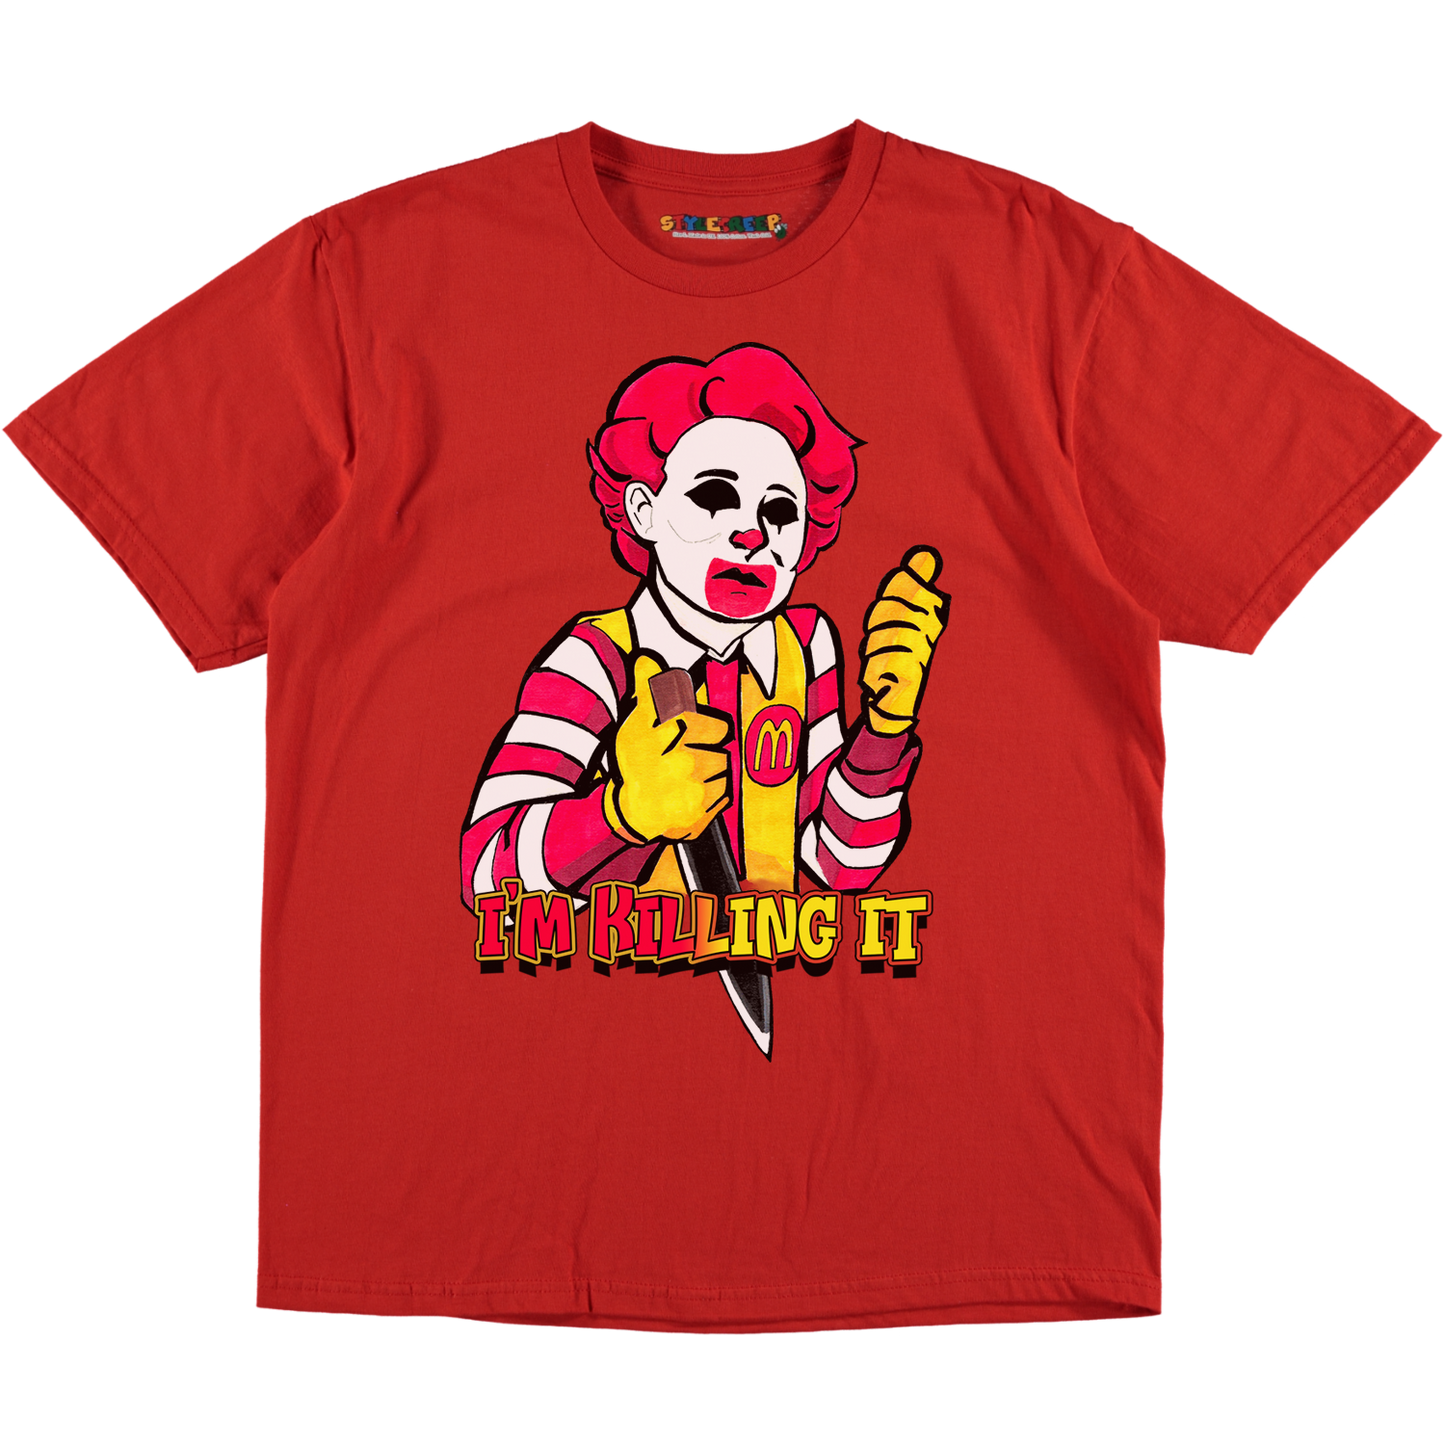 Delicious Again Peter McMyers Tee (All Colours)